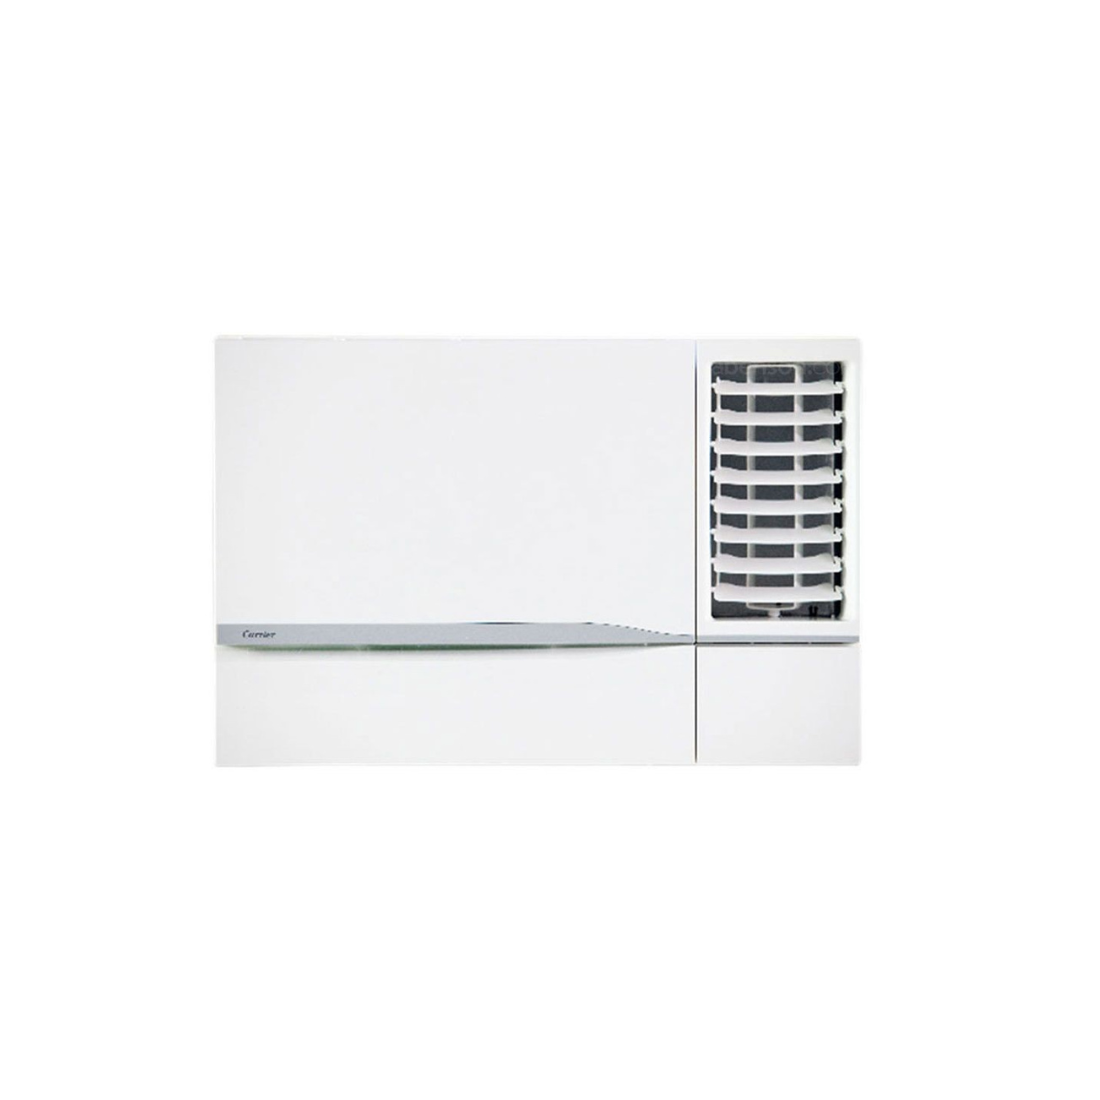 Carrier 0.75 HP Timer I-Cool Window-Type Air Conditioner (Class B)